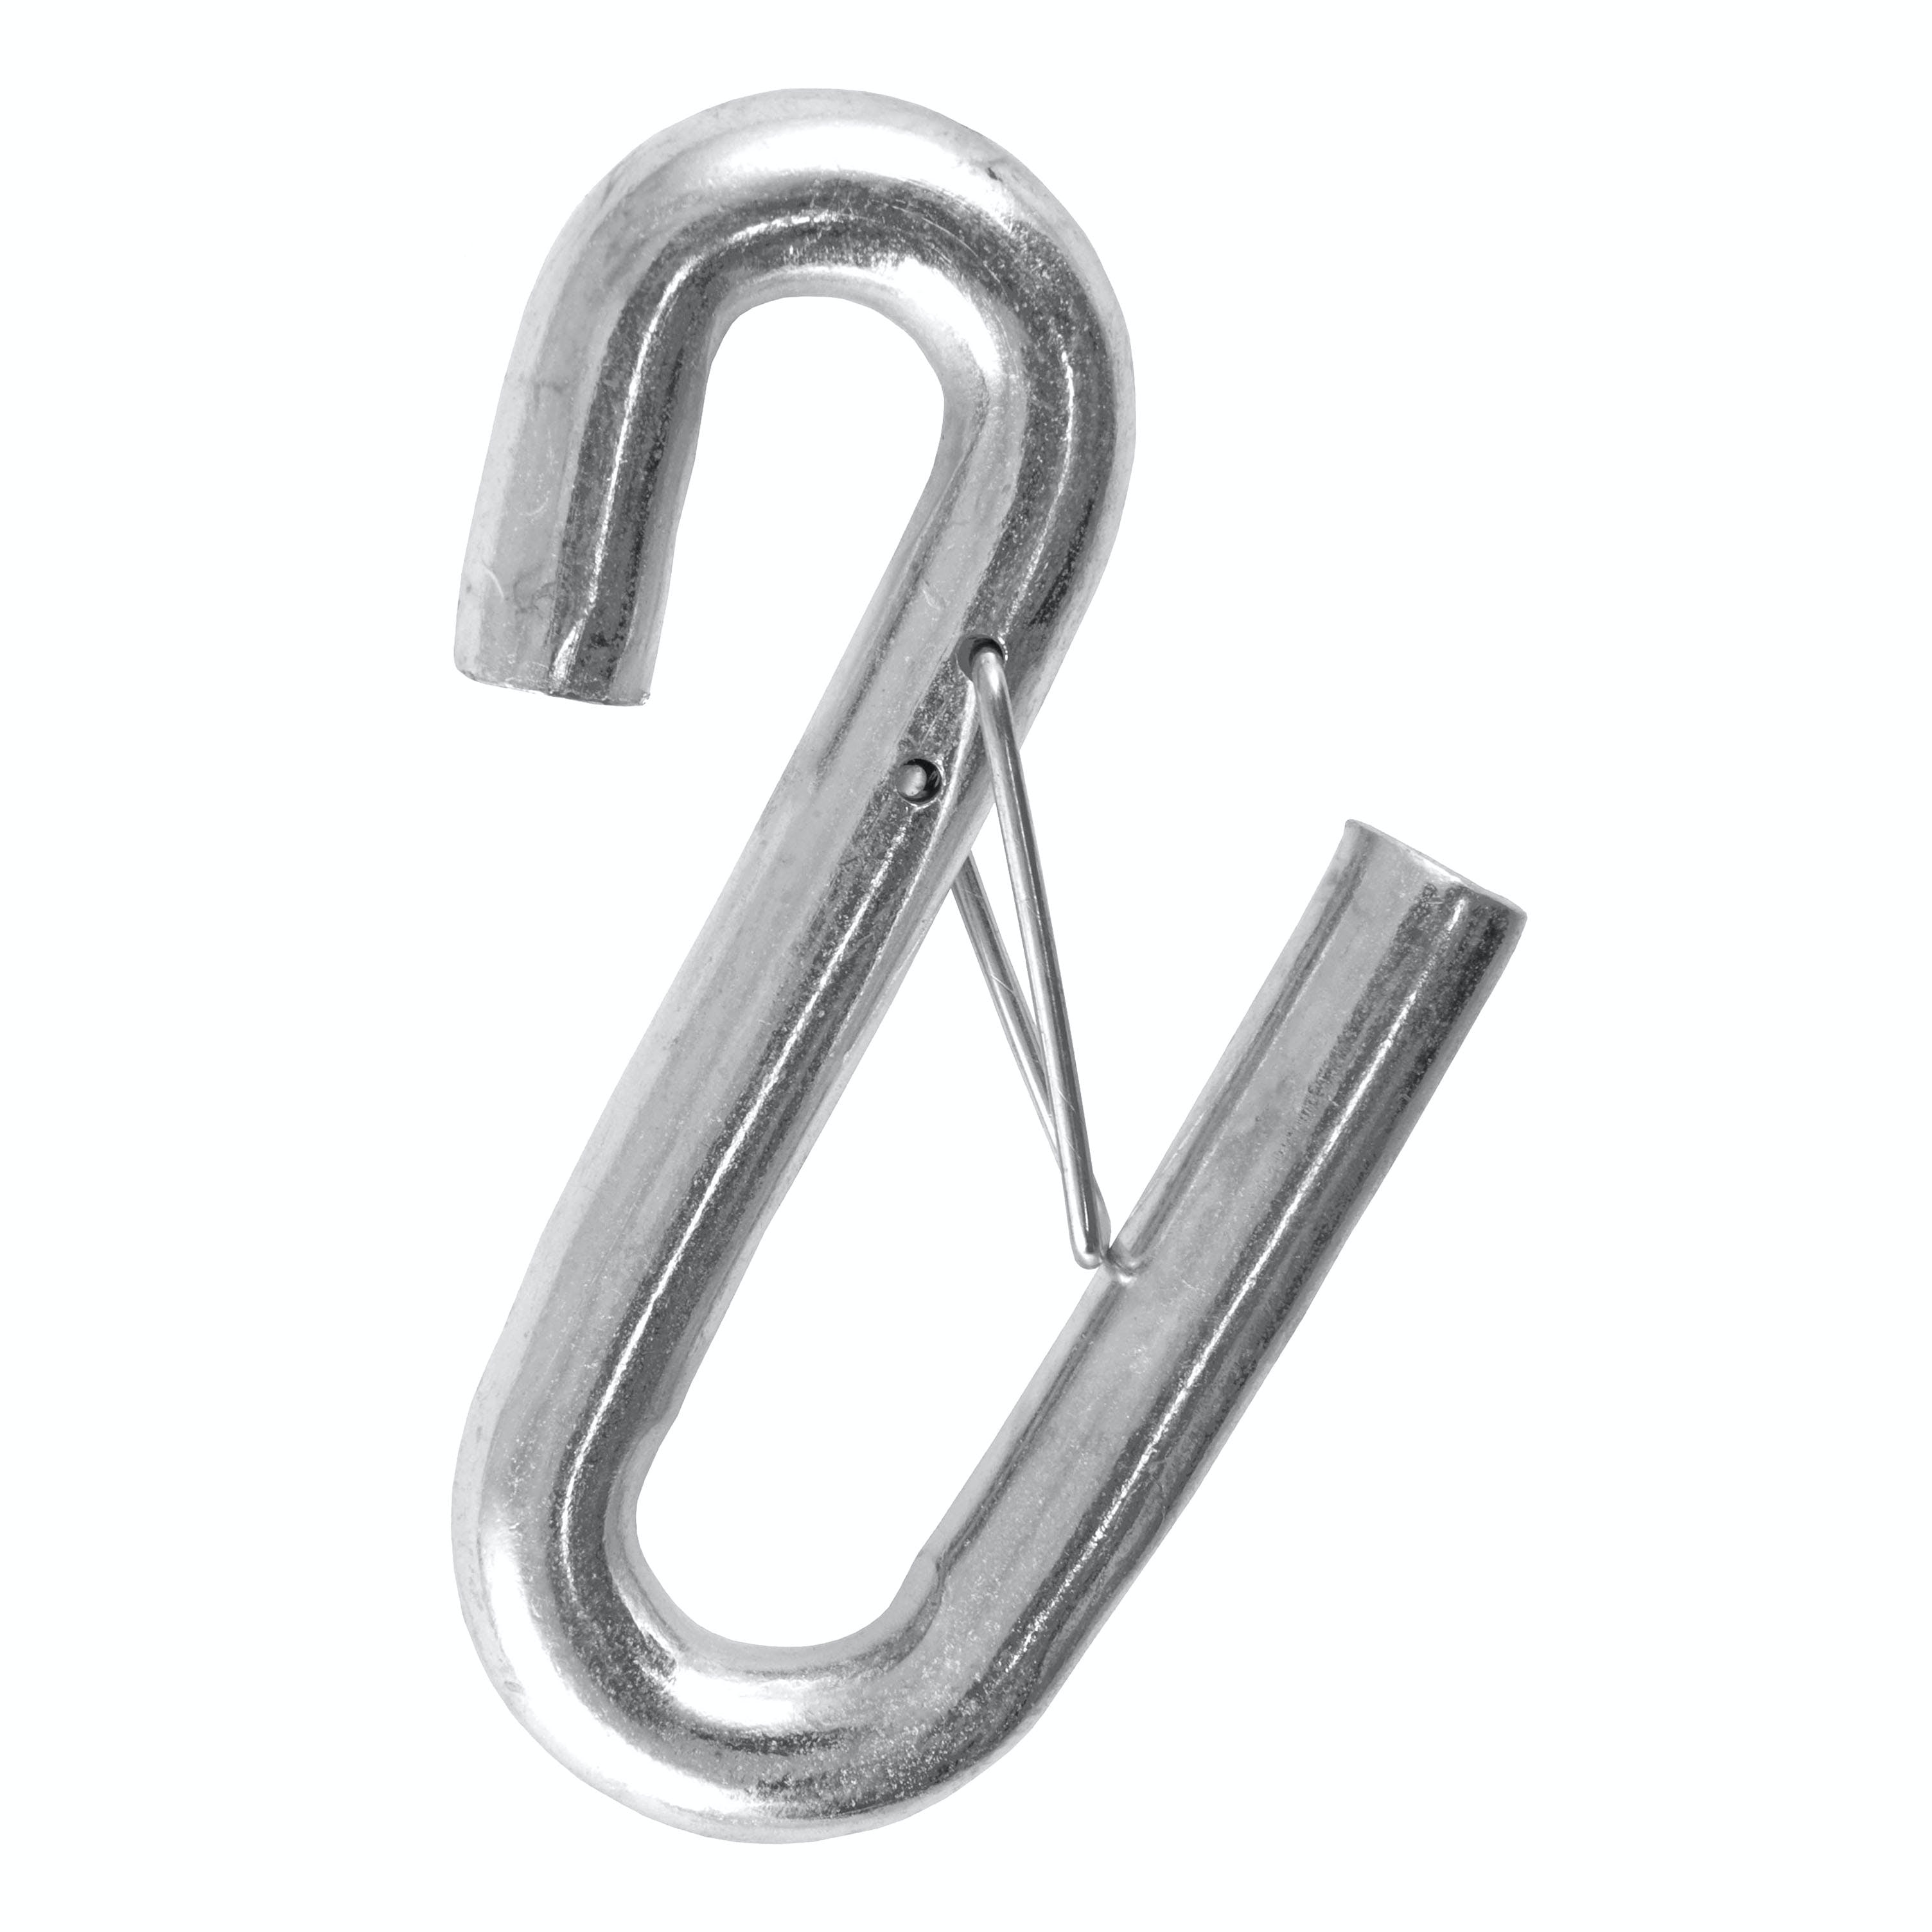 CURT 81830 Certified 17/32 Safety Latch S-Hook (7,600 lbs.)